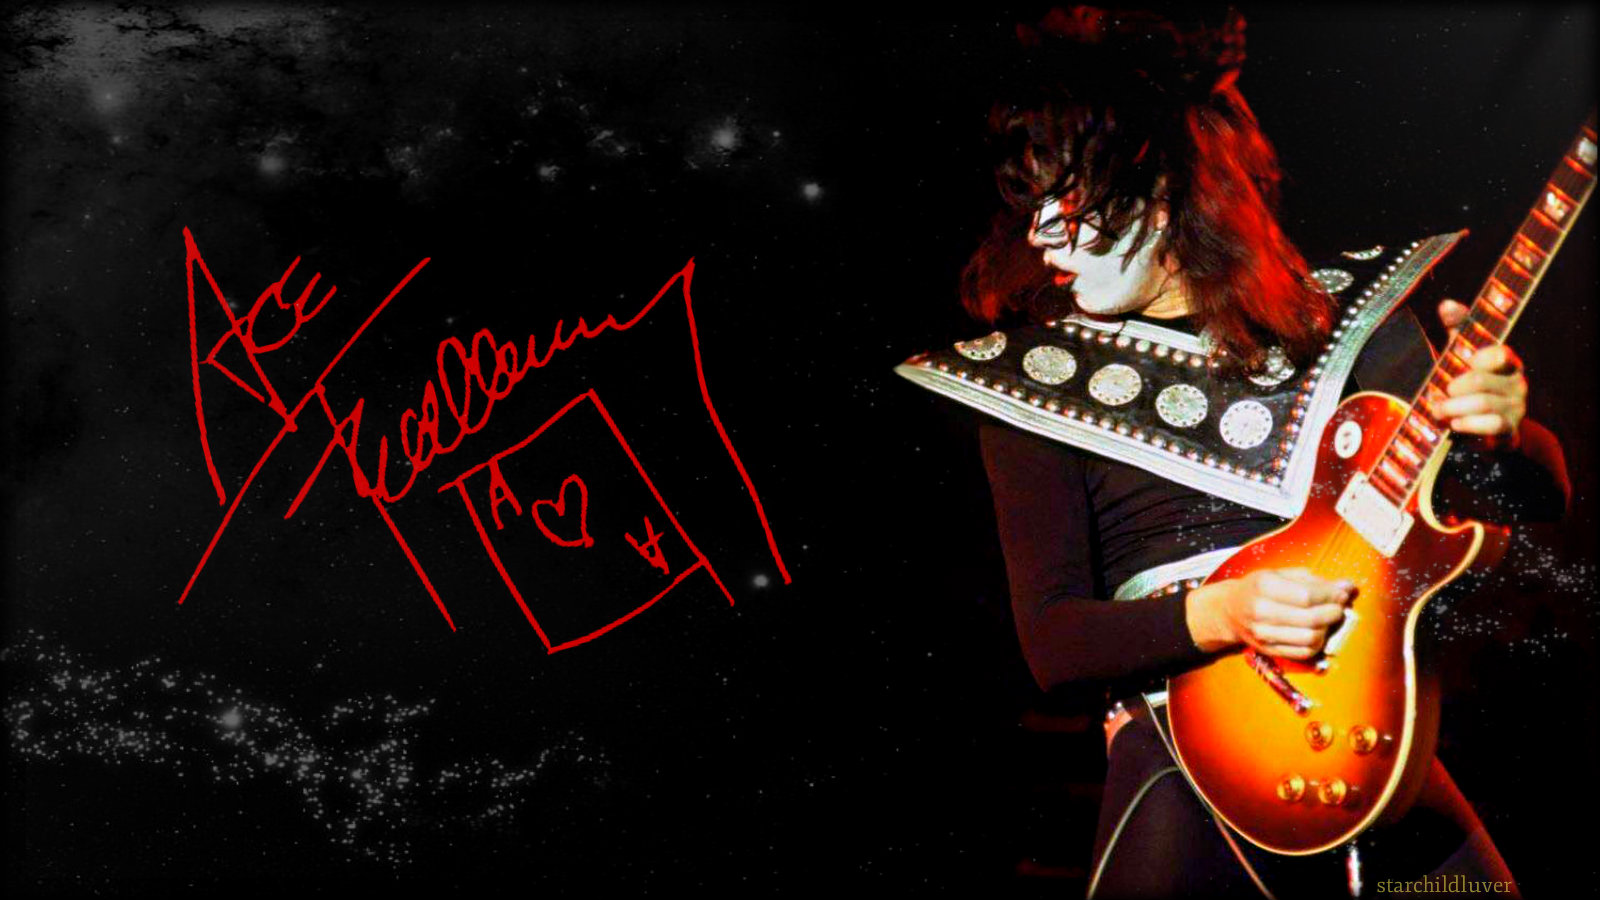 Ace Frehley Wallpapers